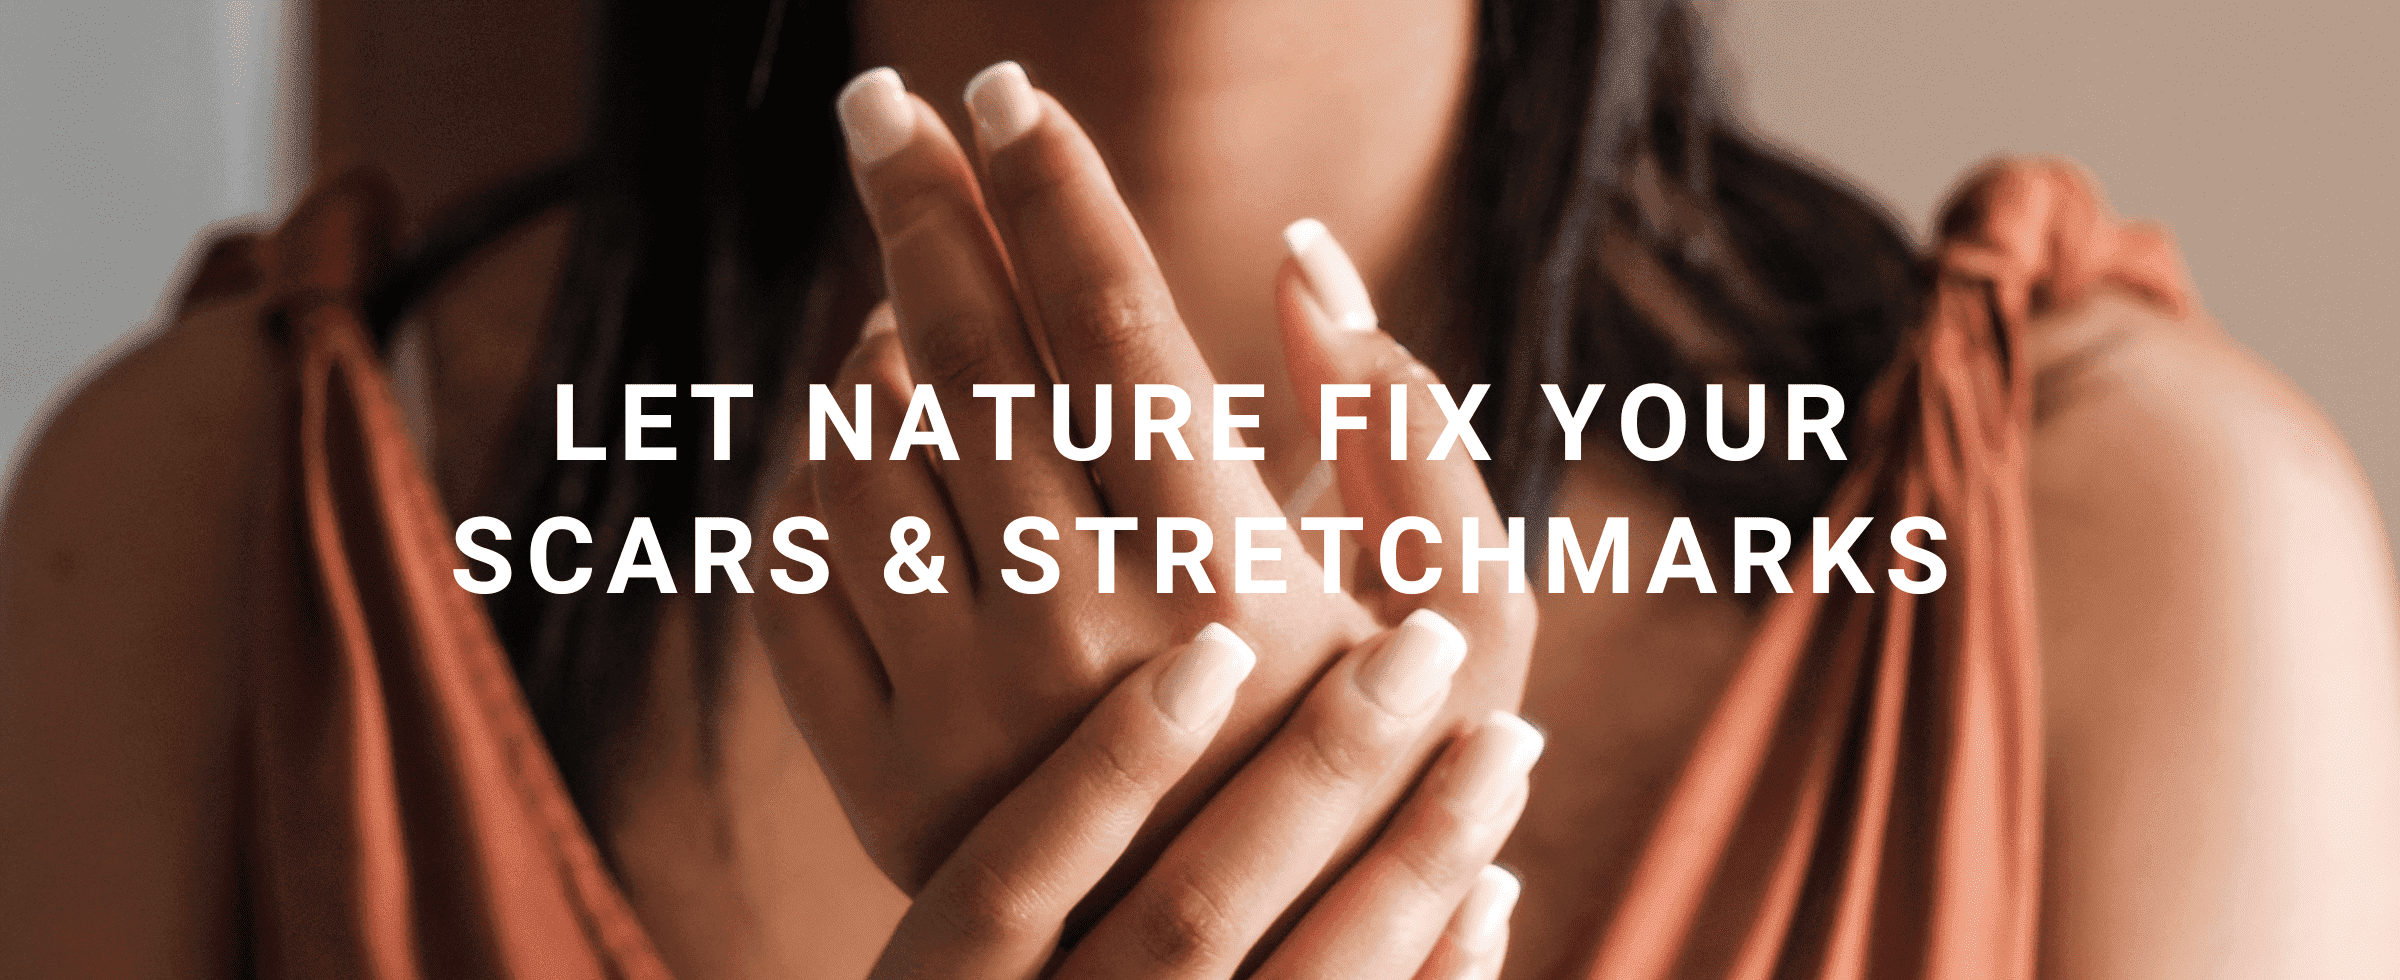 Let nature fix your stretchmarks and scars